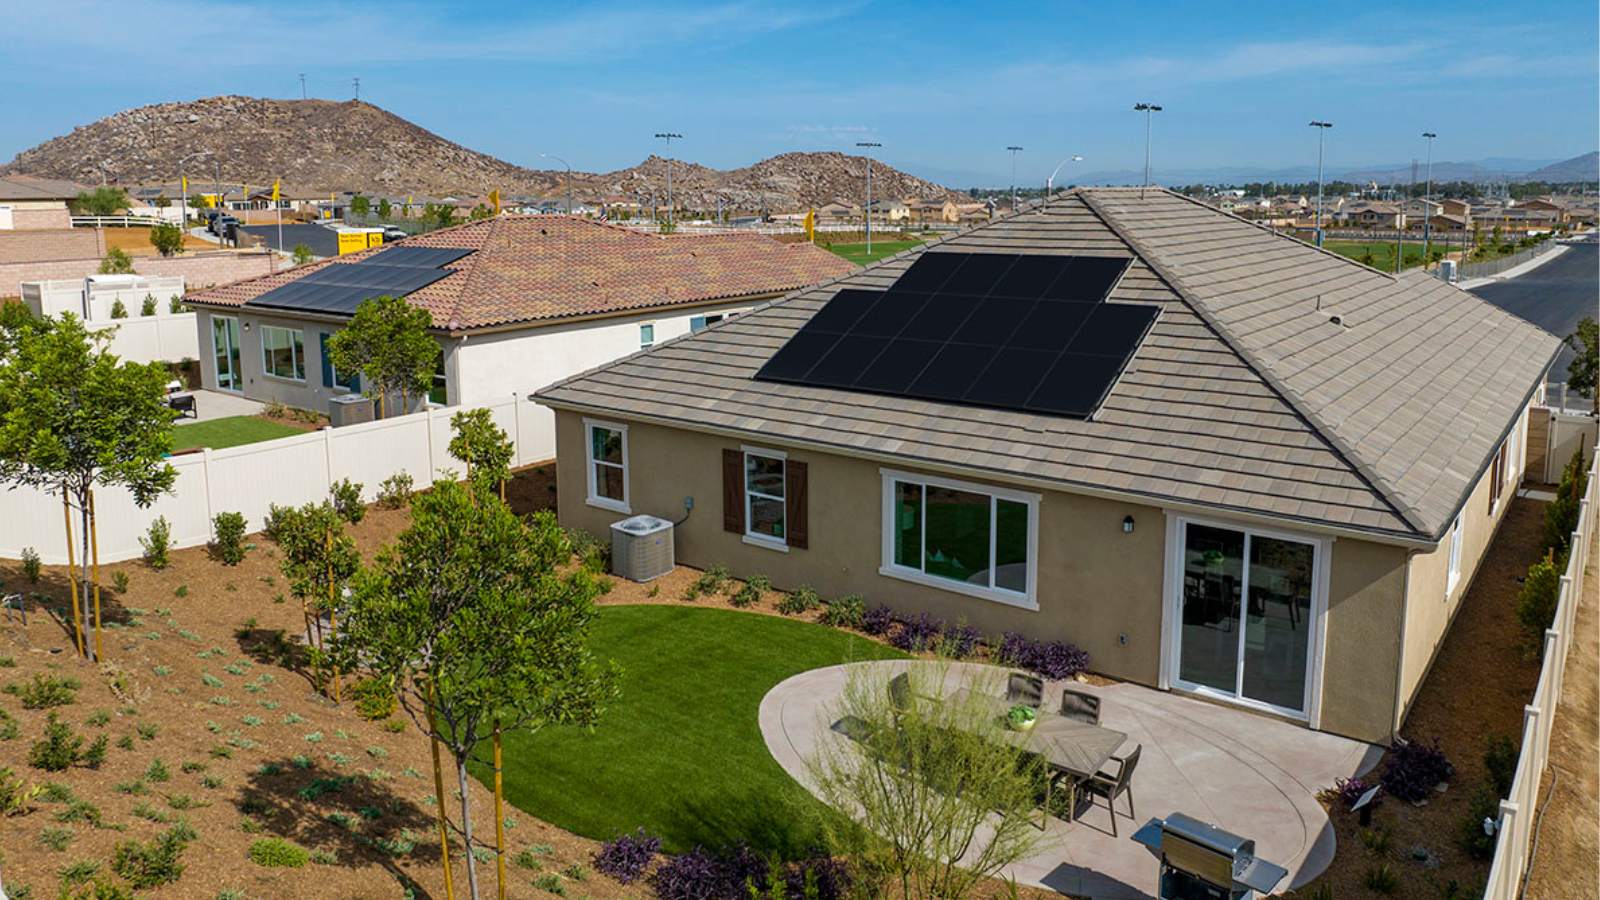 A Tour of California’s First Residential Microgrid Community With 219 Net-Zero-Energy Homes